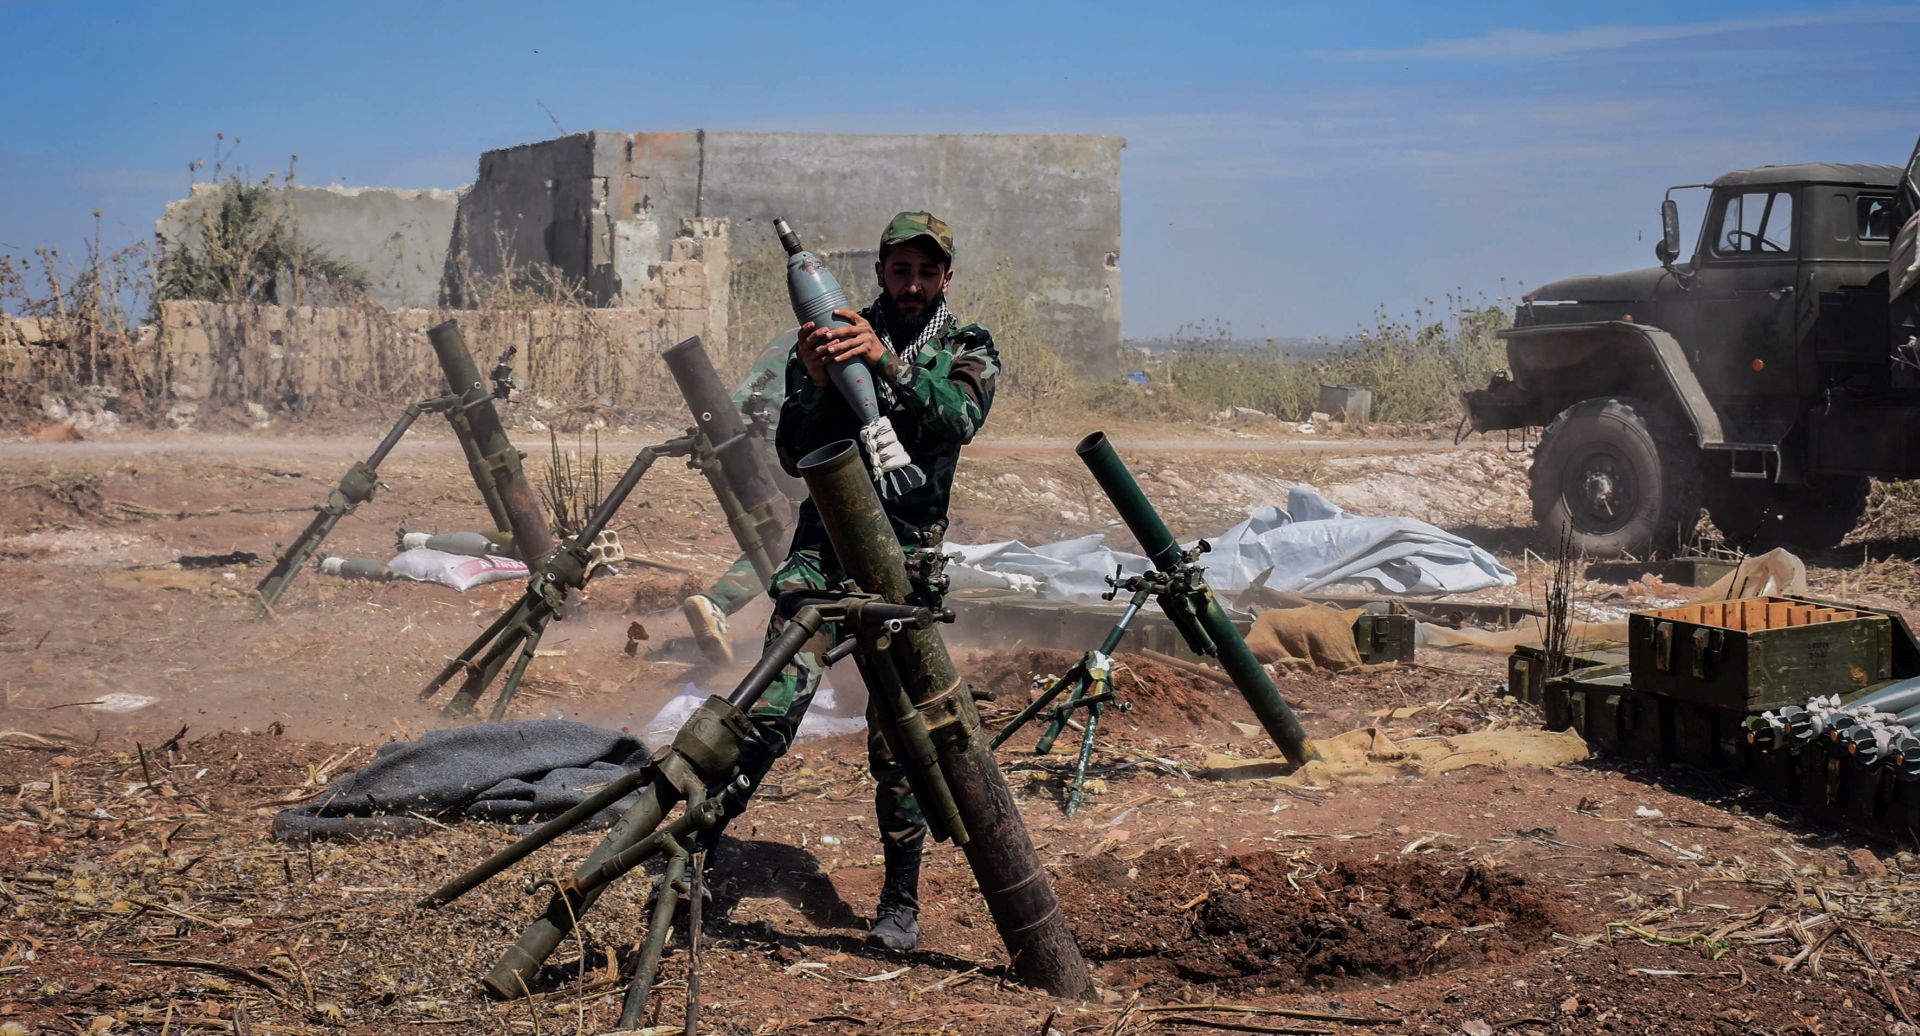 epa07563357 A handout photo made available by the Syrian Arab News Agency (SANA), shows a Syrian army soldier prepares to target terrorists' area, during an operation to liberate the village of Kafar Naboudeh, in Hama, Syria, 11 May 2019. According to SANA, the liberation of the town was achieved following precise and accurate operations targeting the terrorists' positions in the town, paving the way for expanding the secure area in Hama's northern countryside to include al-Bana, al-Arima, Tel Othman, Qalaat al-Madiq, and Bab al-Taqa.  EPA/SANA HANDOUT  HANDOUT EDITORIAL USE ONLY/NO SALES